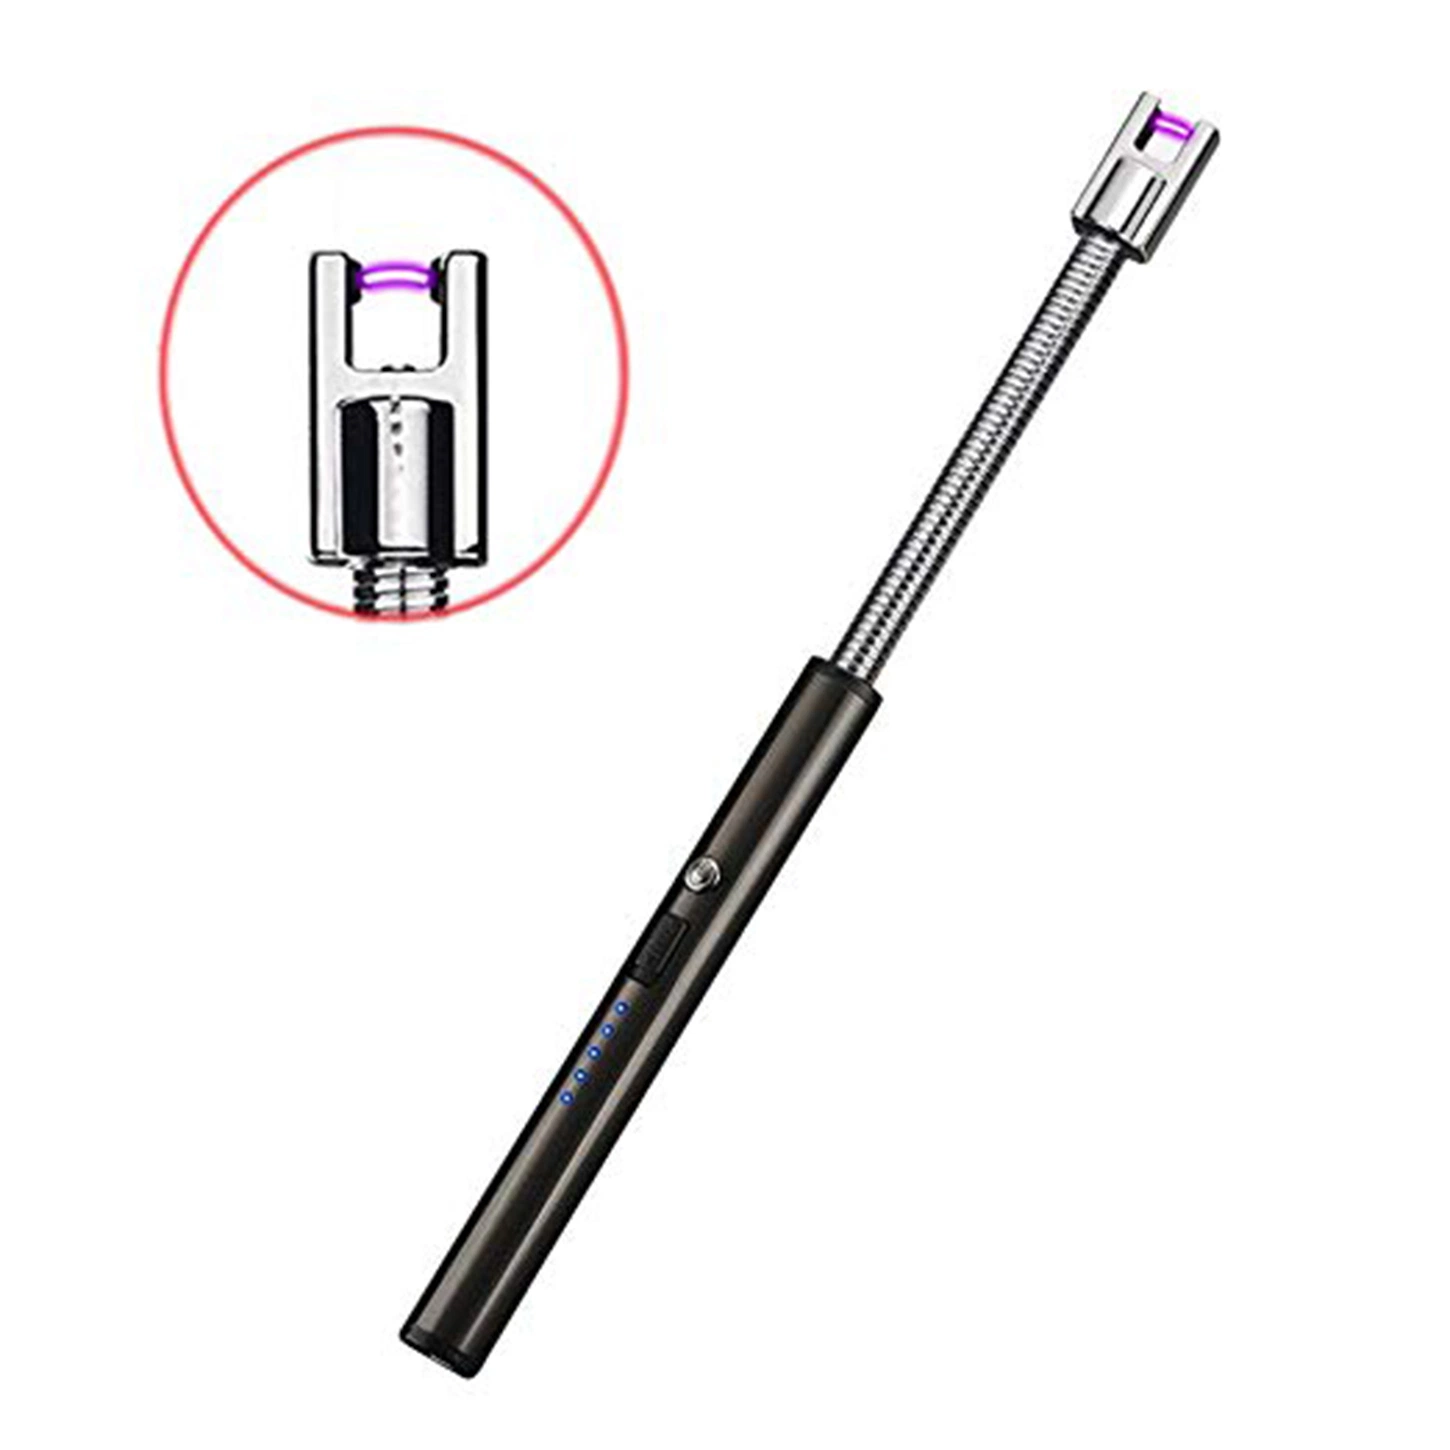 Best Quality Cheap Price Electric Arc Windproof Flameless USB Lighter BBQ Metal Lighter with Safety Lock for Candle Camping Kitchen